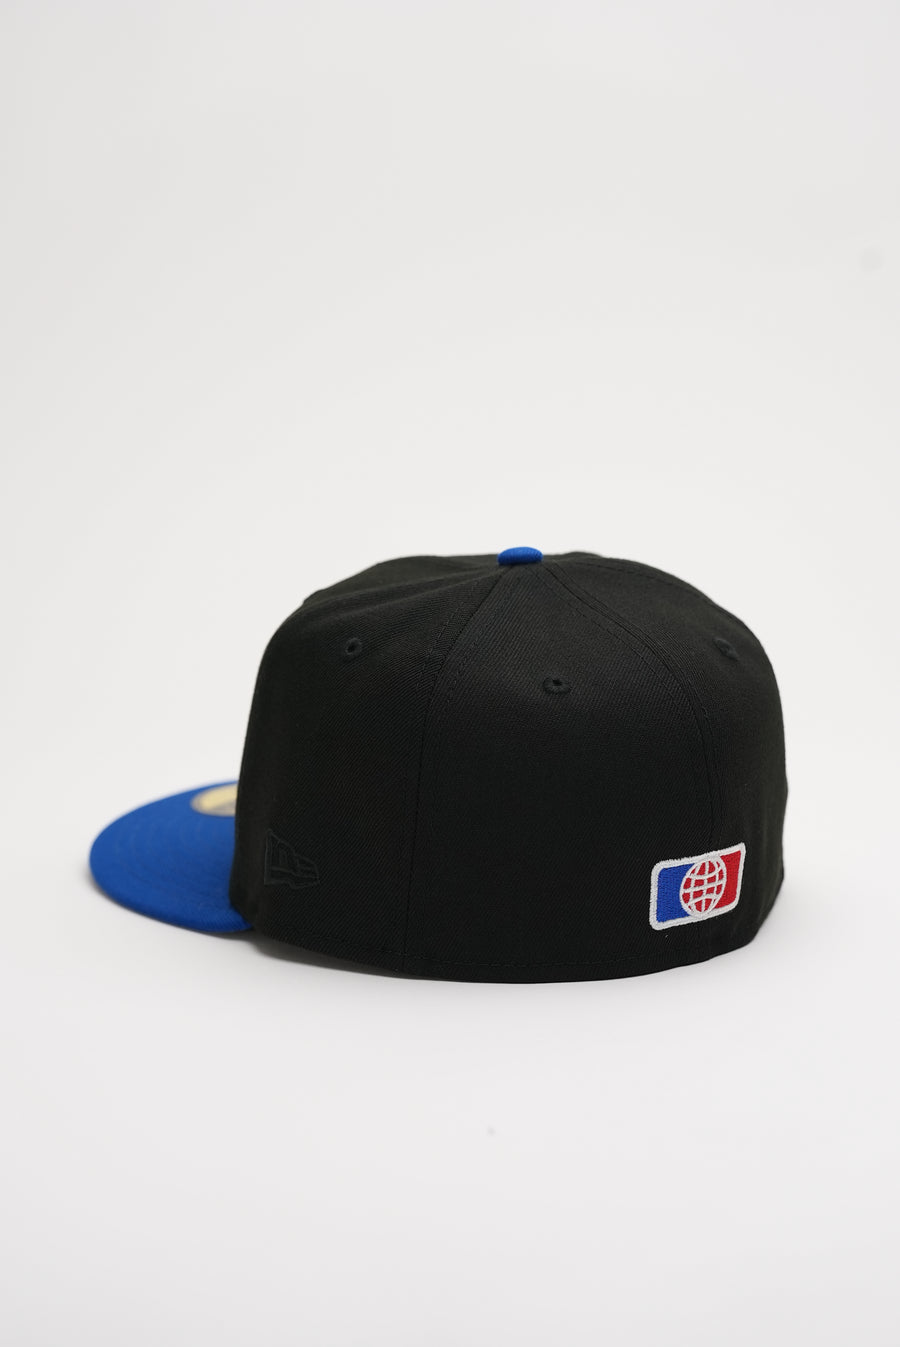 Limited Black / Royal Blue Puerto Rico Flag 1LoveIE New Era 59FIFTY Fitted Cap